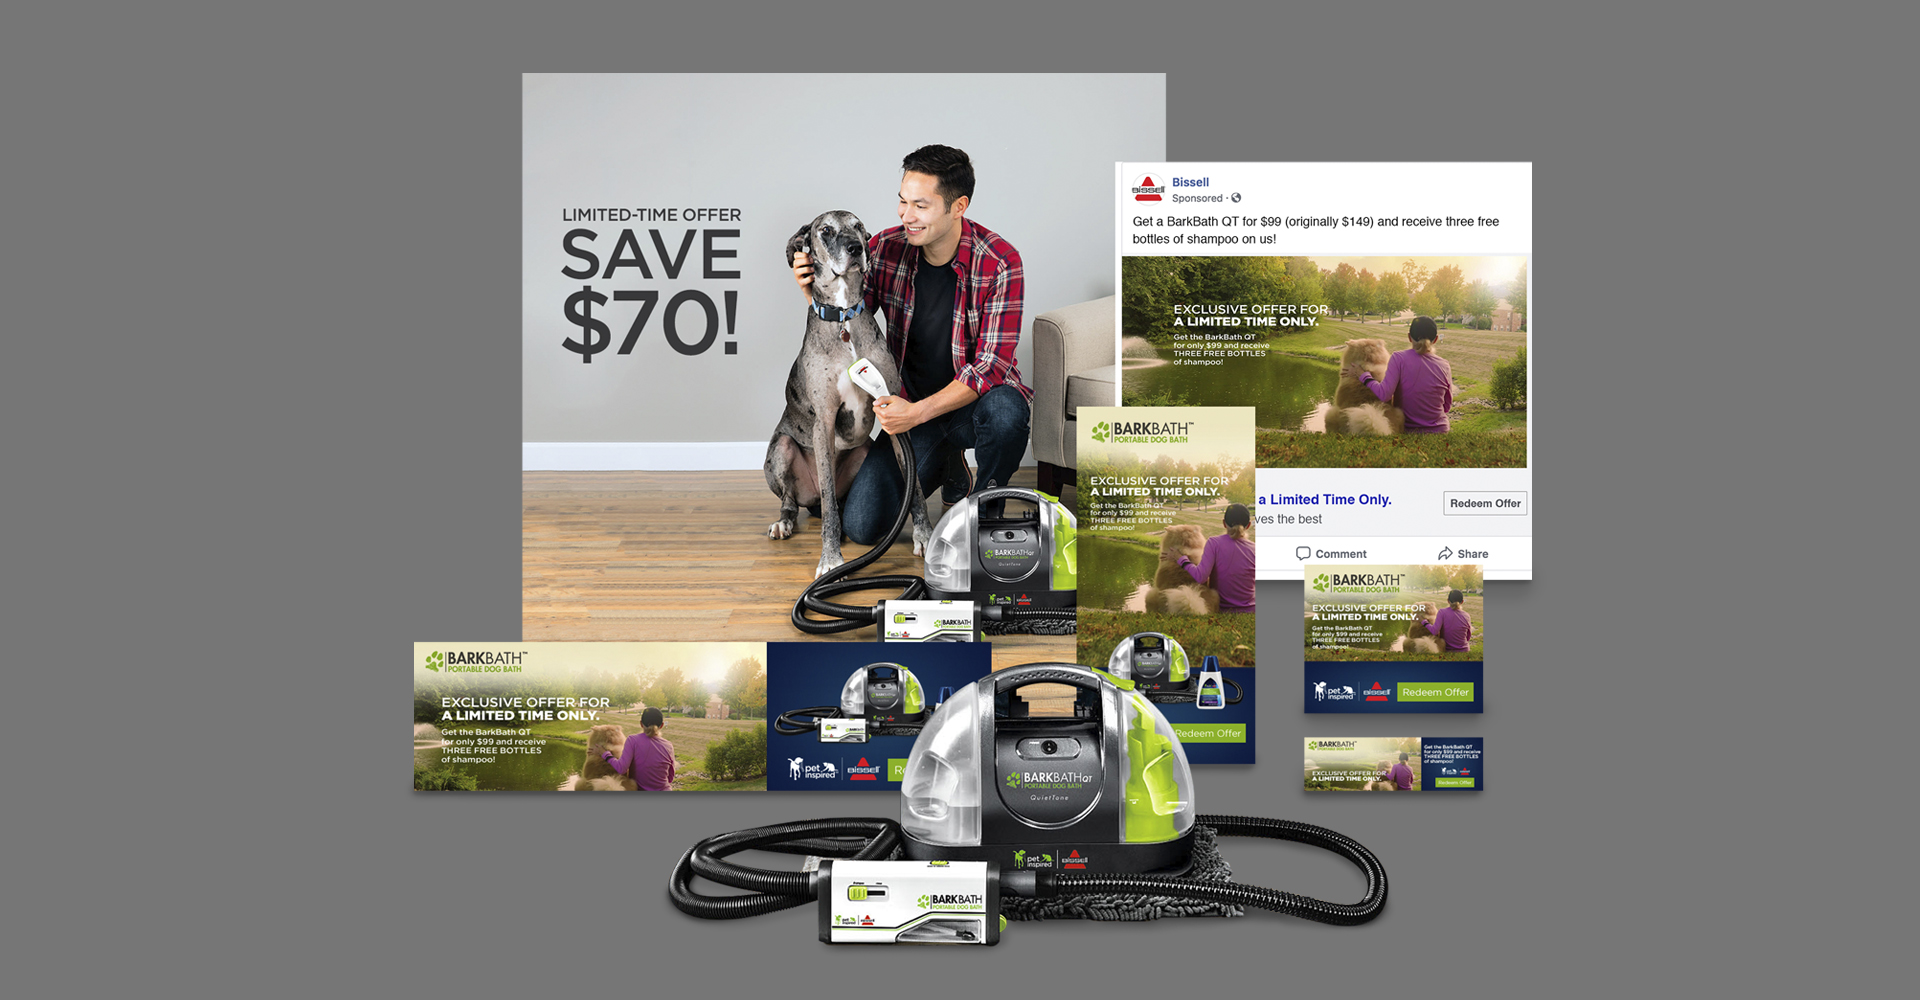 BISSELL BARKBATH™ Product Launch Campaign ad, social and layout design by Blue Flame Thinking